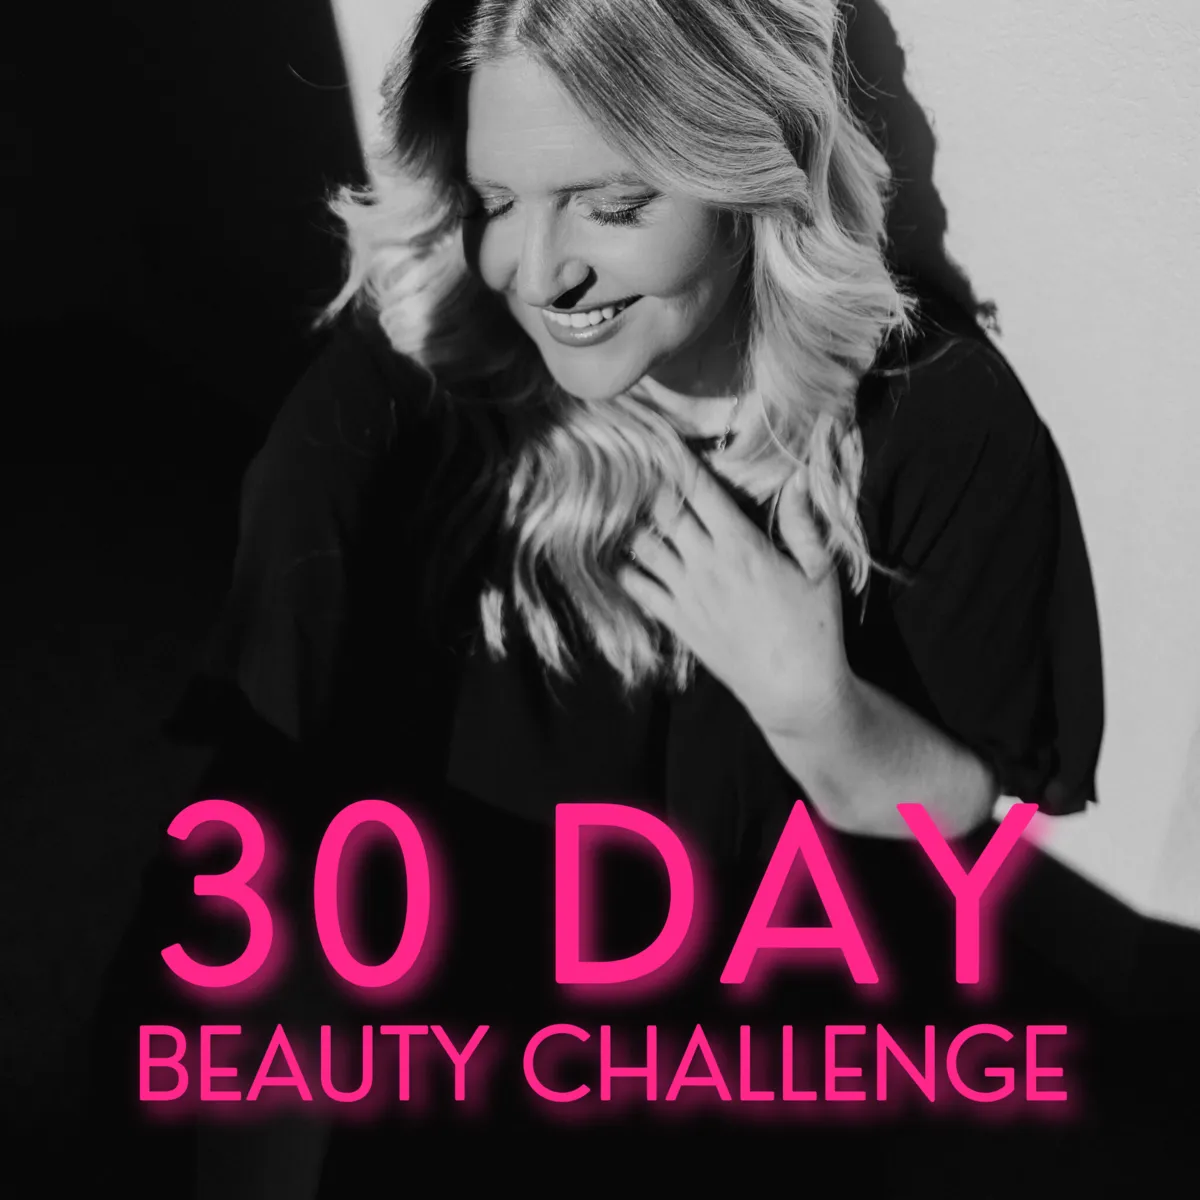 30 Day Beauty Challenge